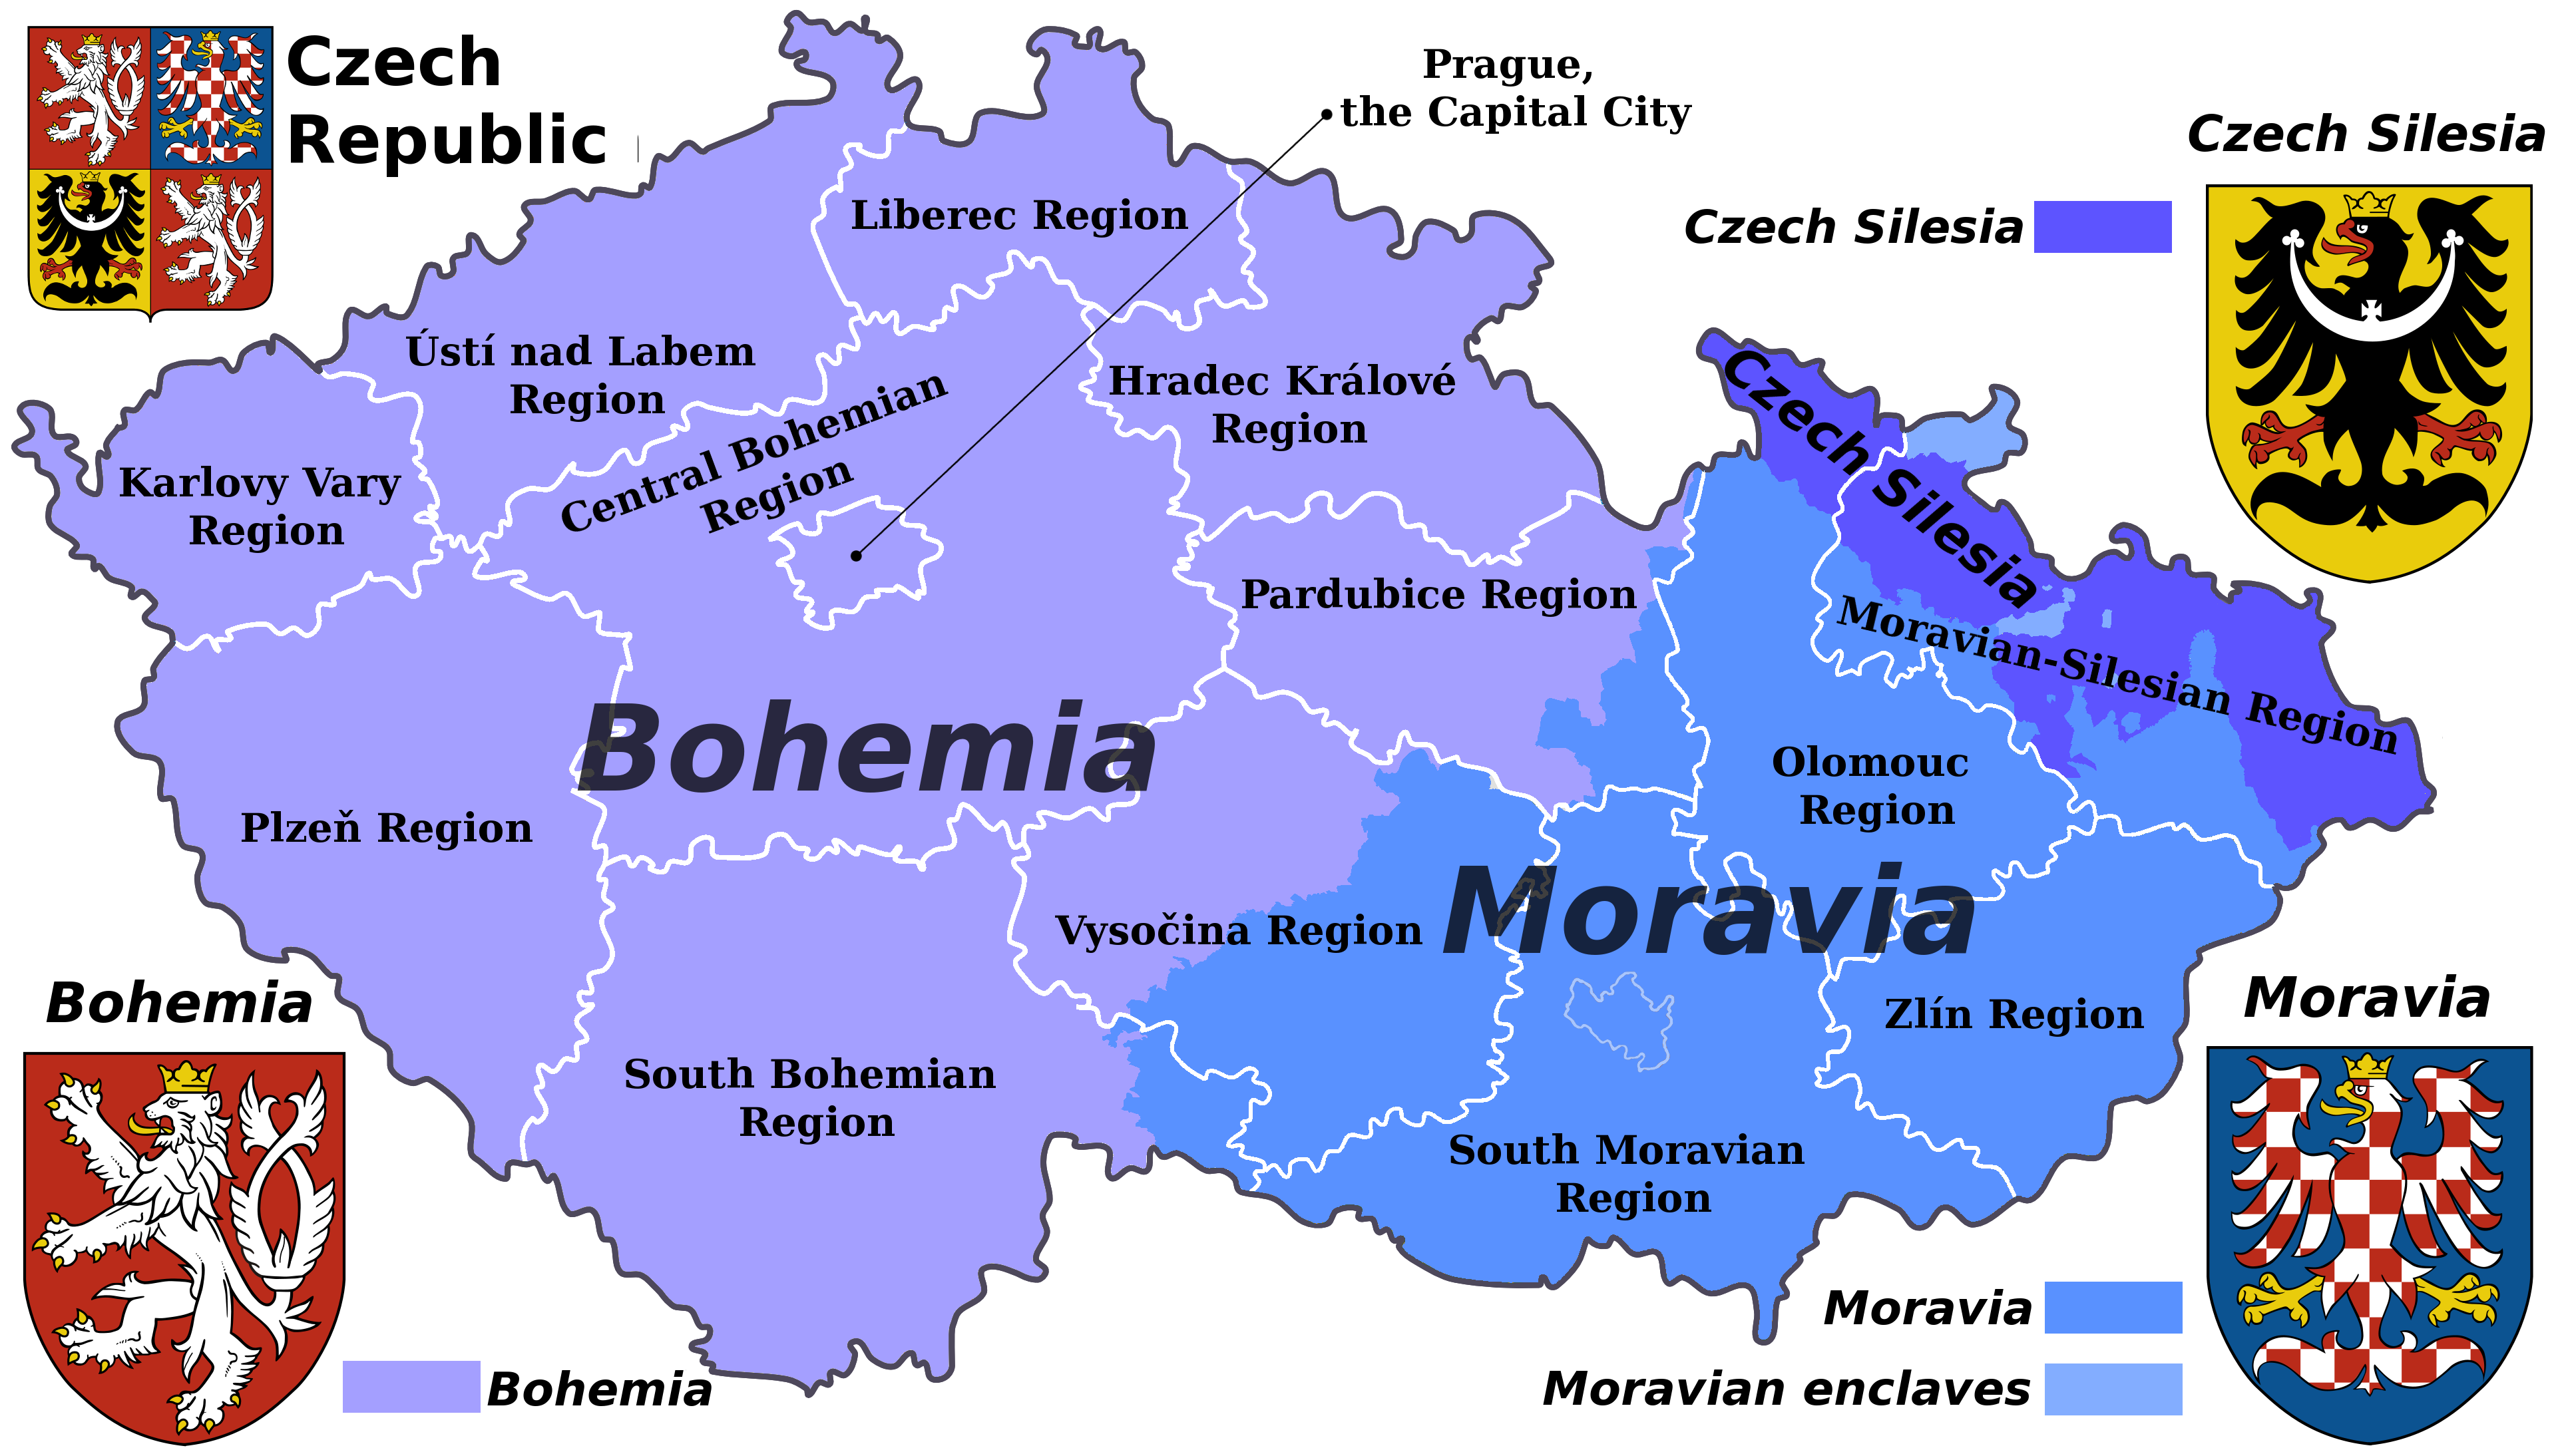 traditional regions and current administrative regions